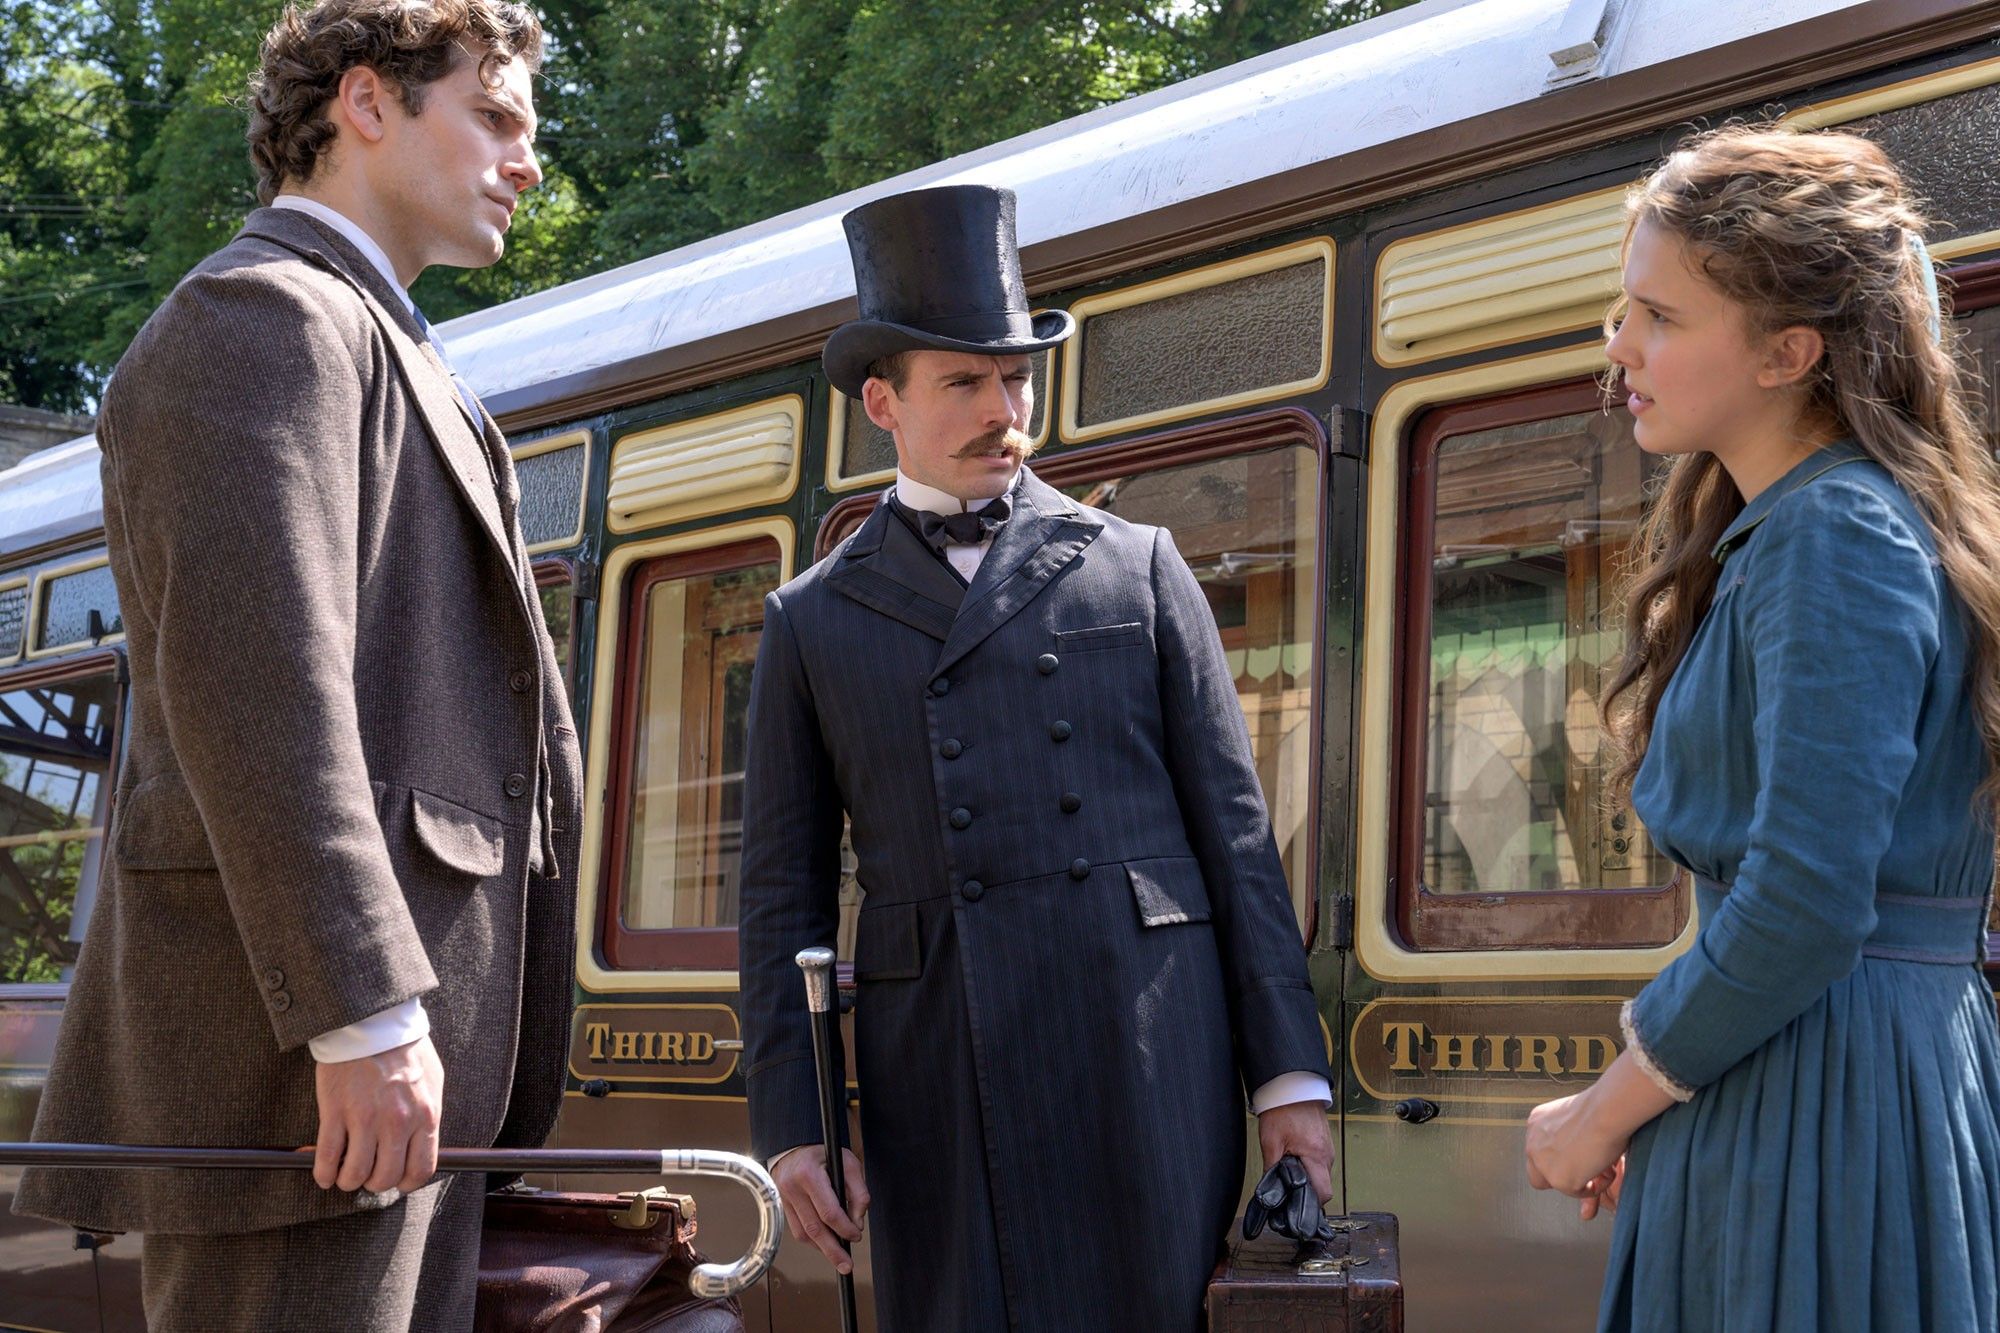 Henry Cavill Sam Claflin and Millie Bobbie Brown in Enola Holmes